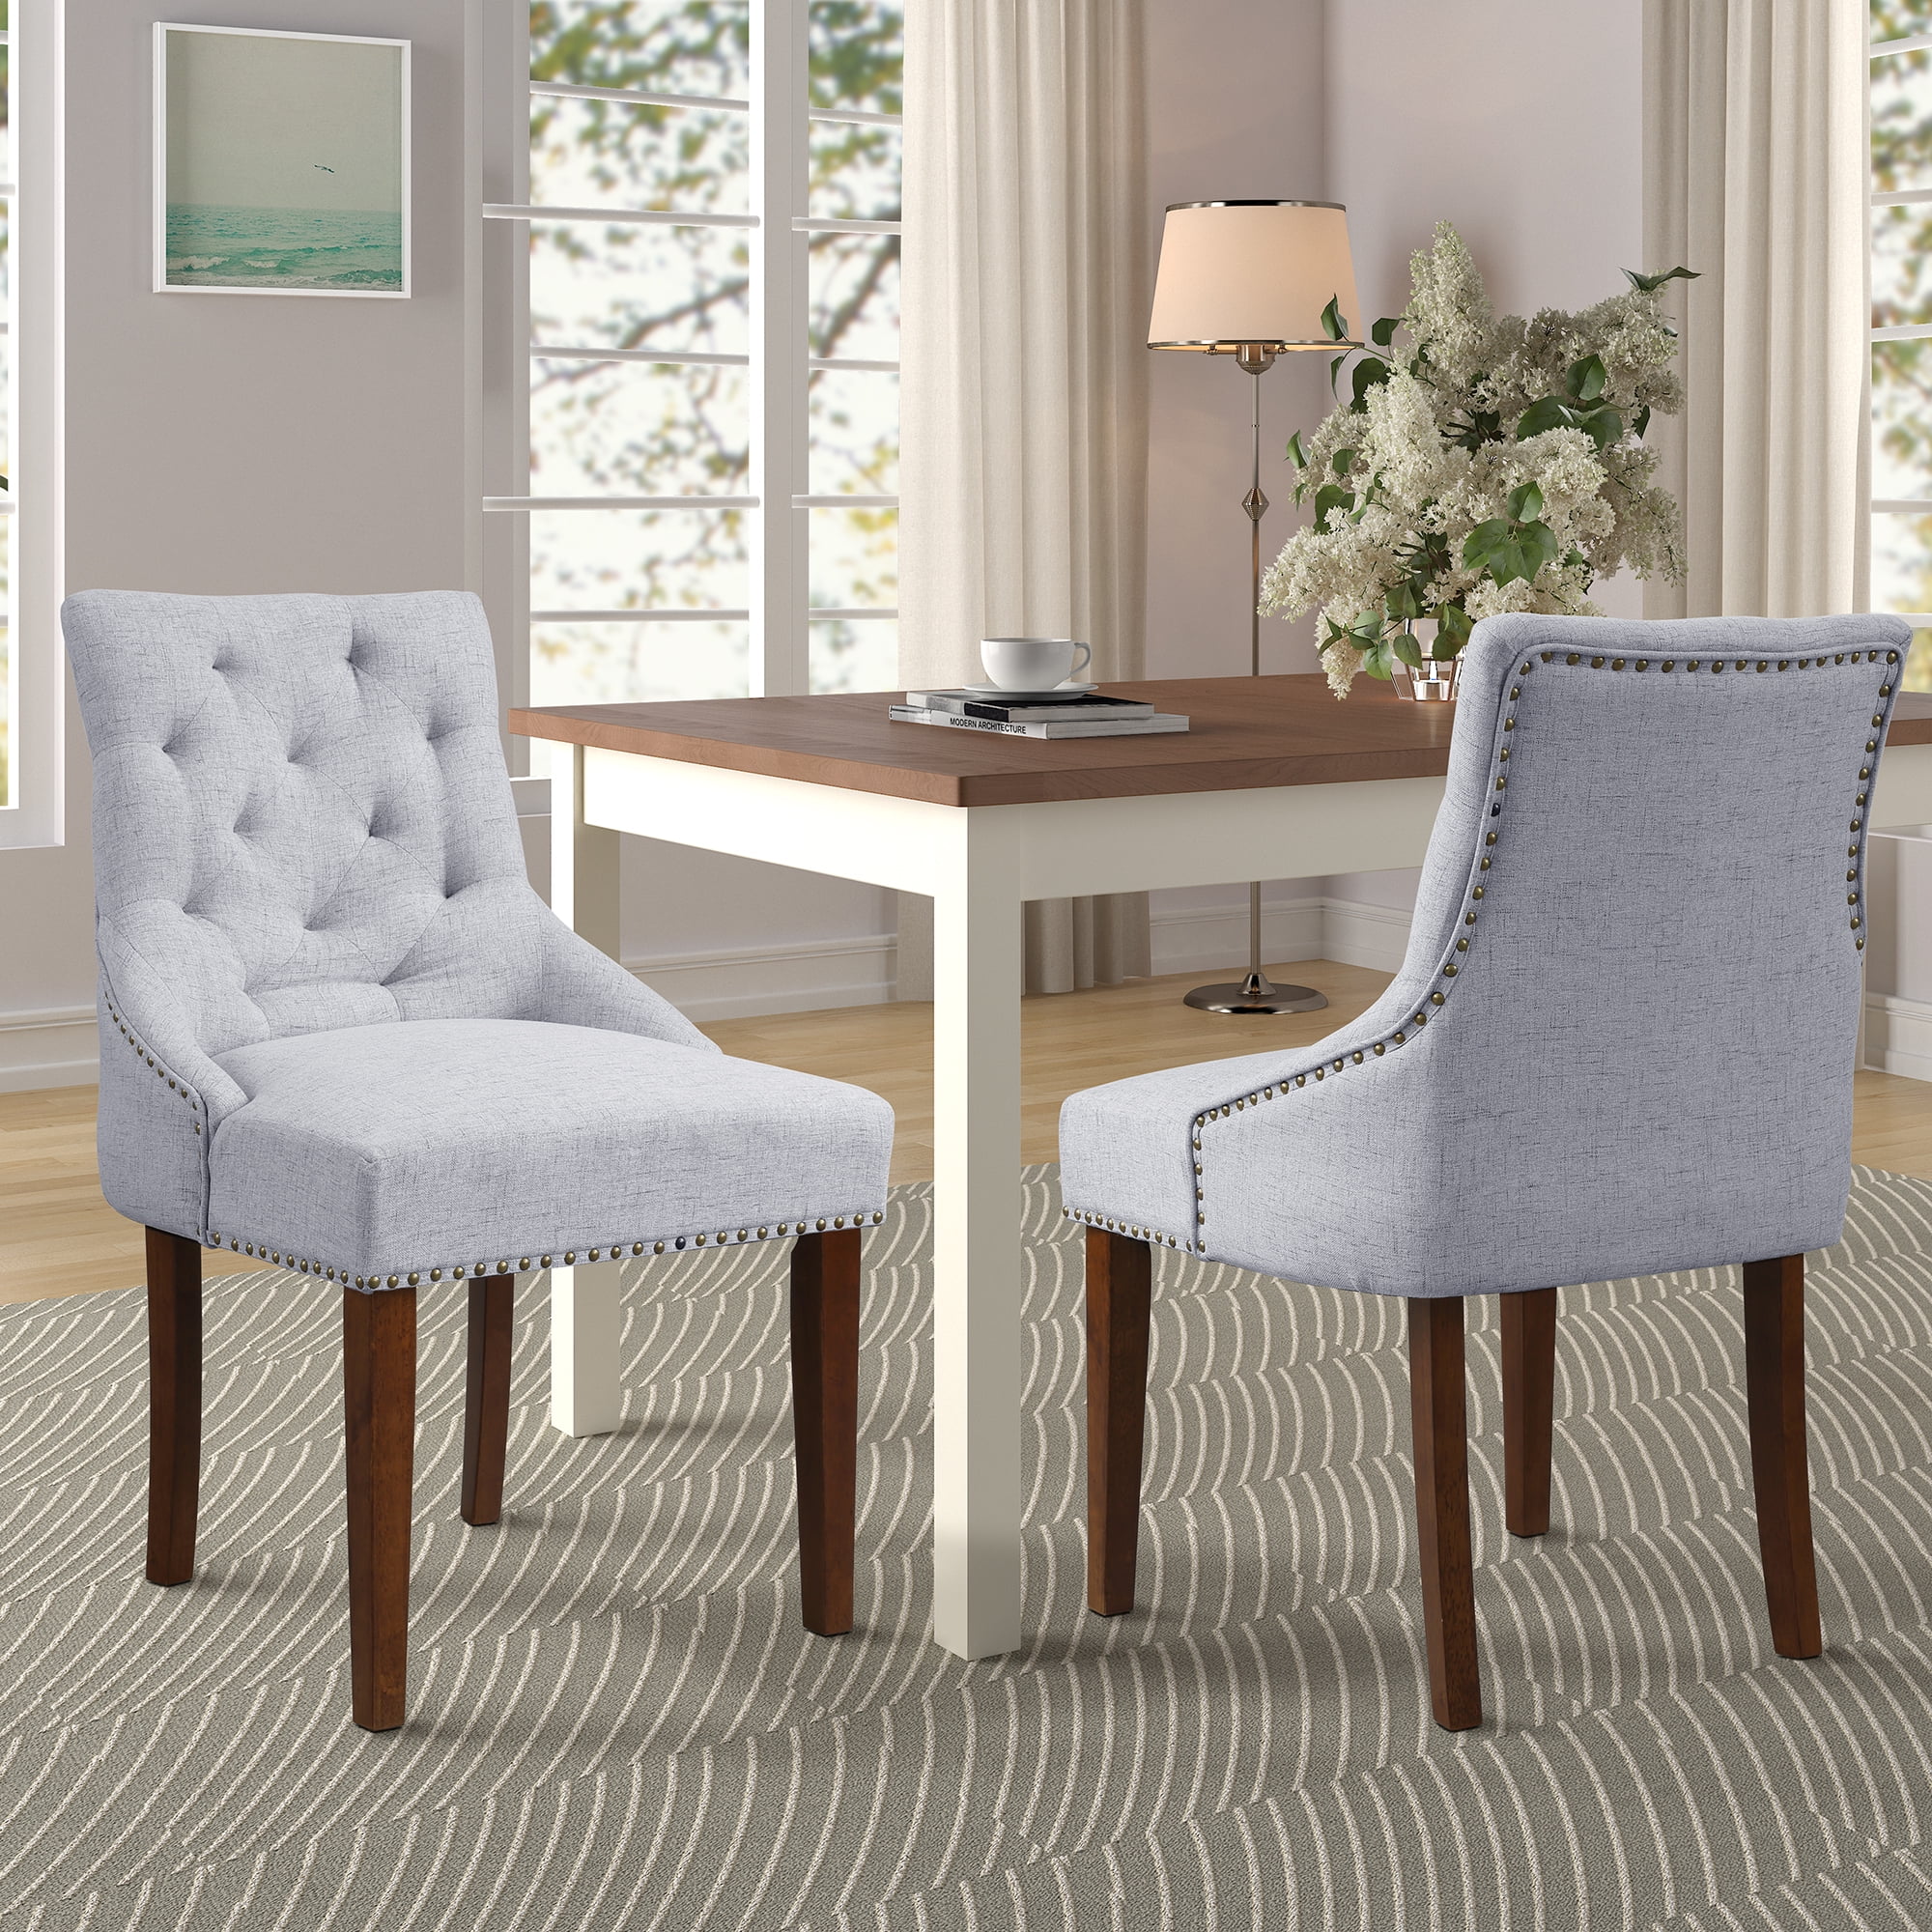 Clearance! Tufted Upholstered Dining Chairs Set of 2, Fabric Dining